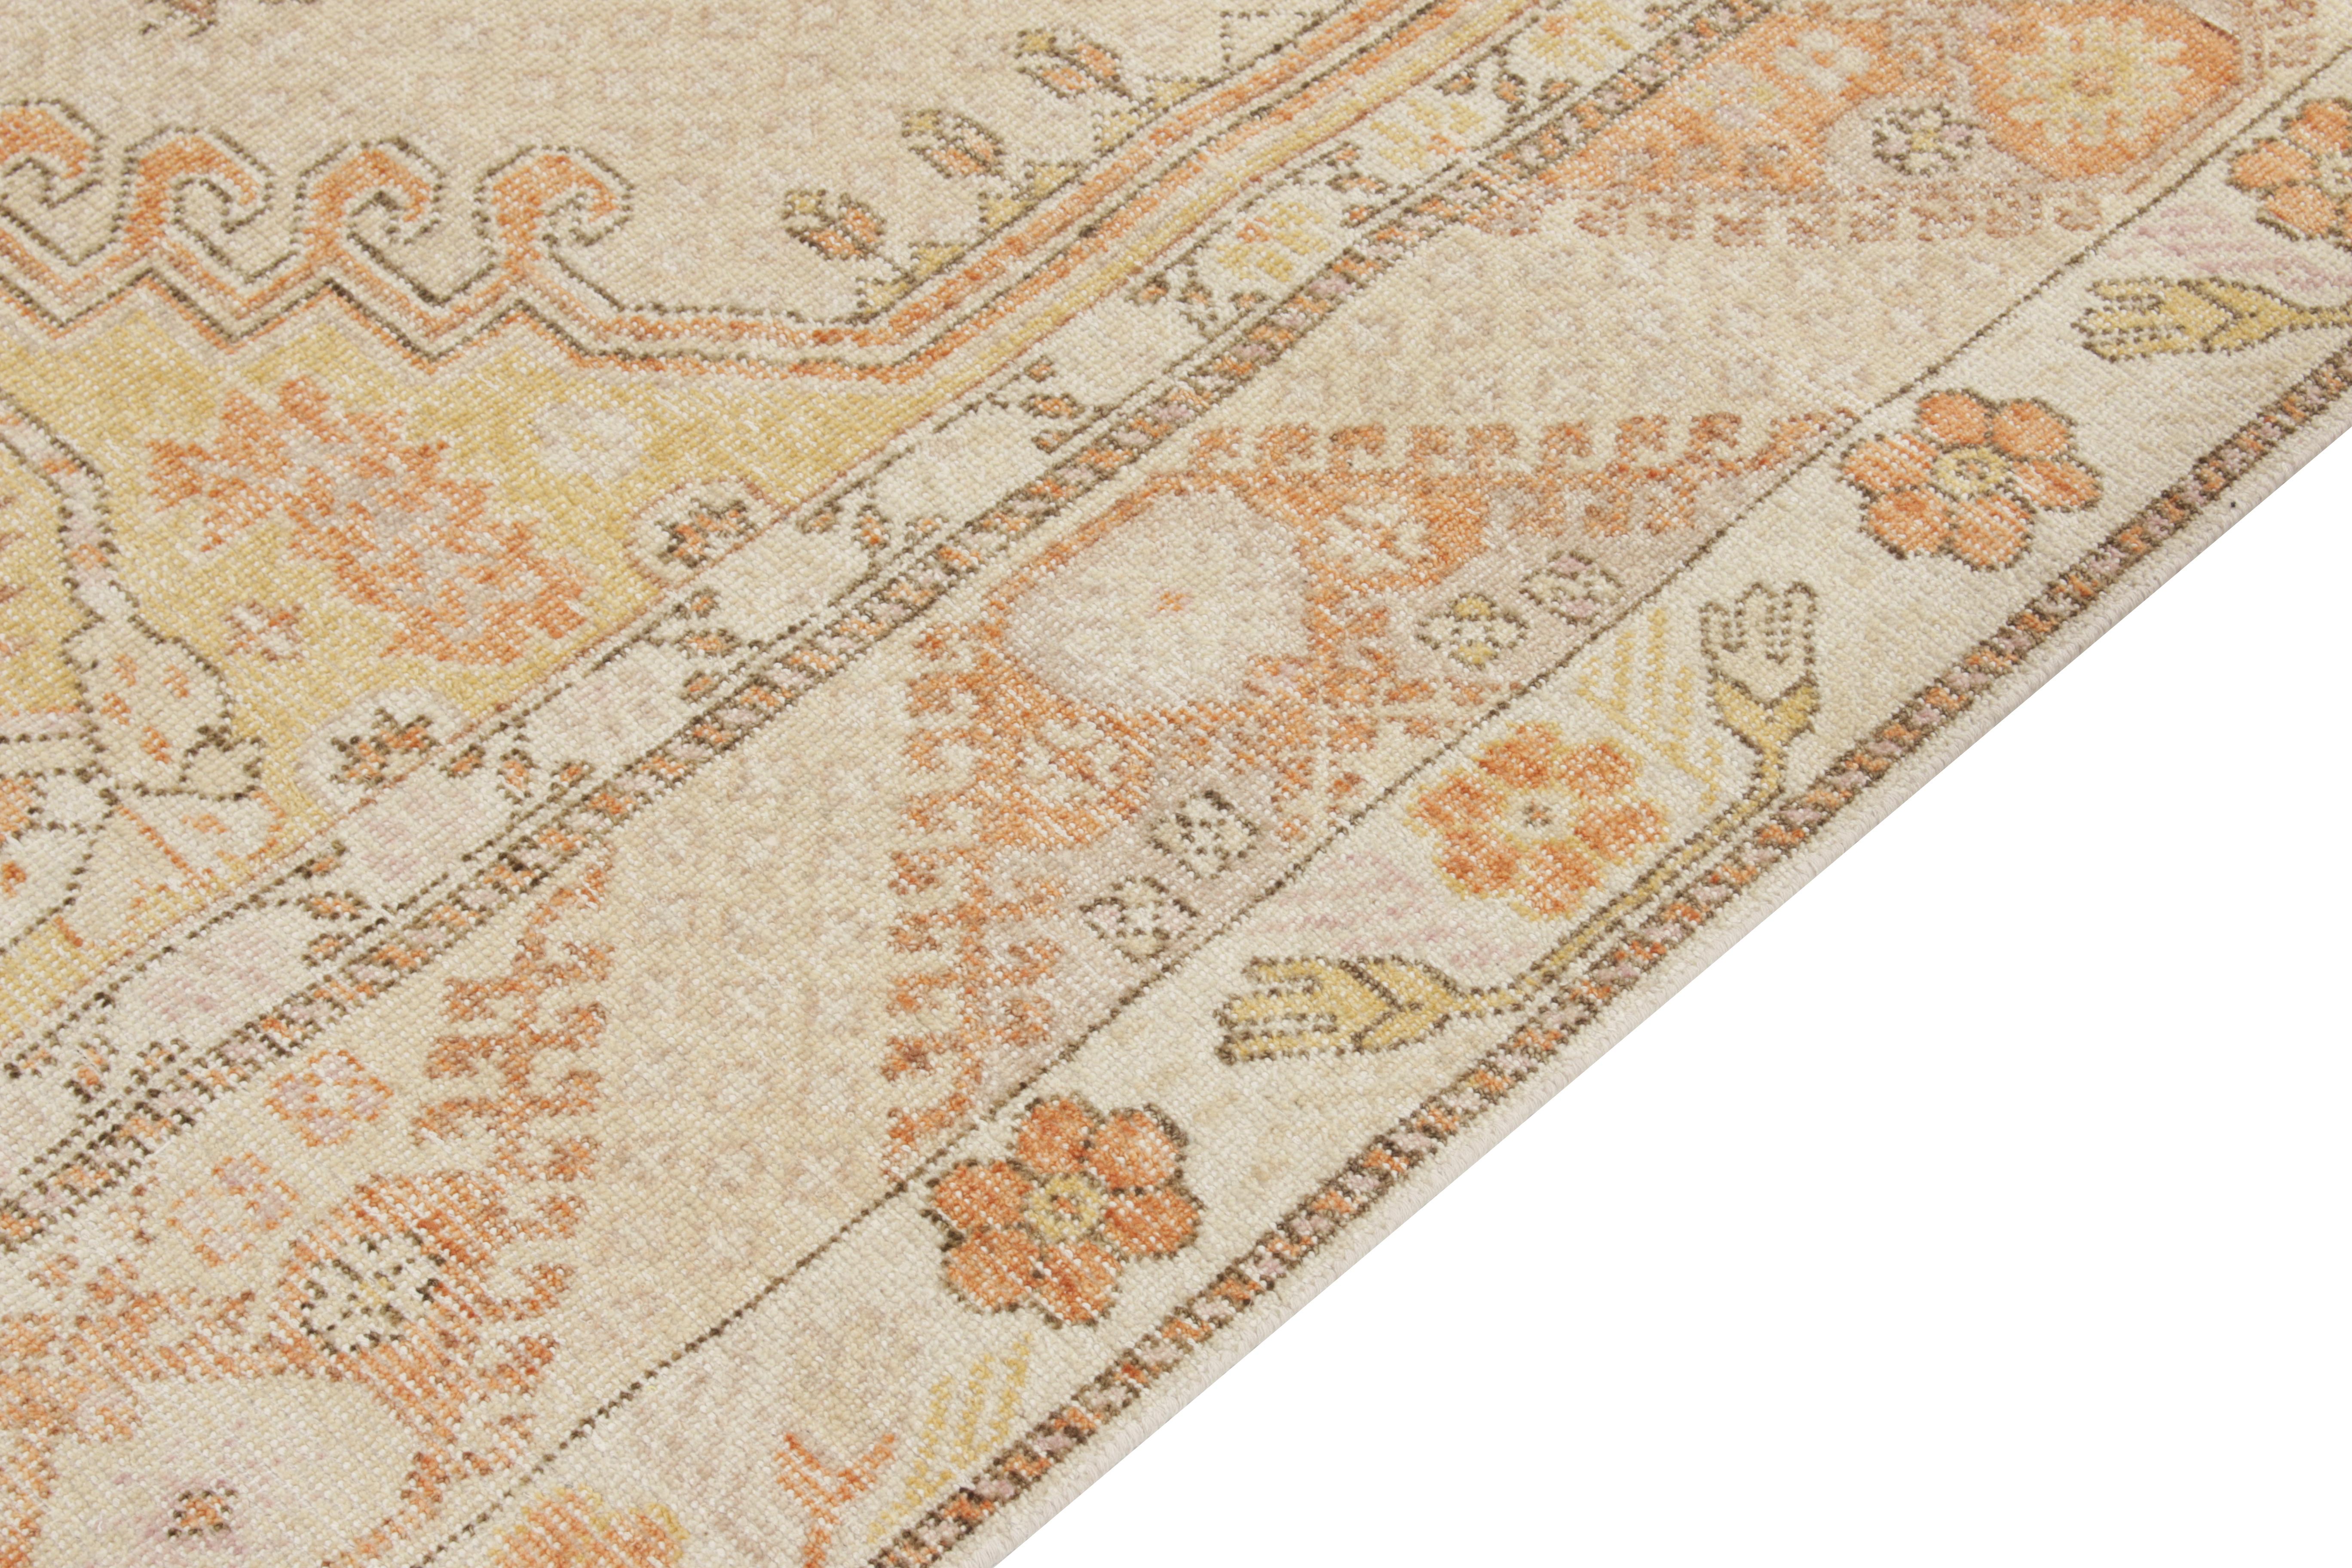 Indian Rug & Kilim's Distressed Classic Style Rug in Cream, Orange Medallion Pattern For Sale